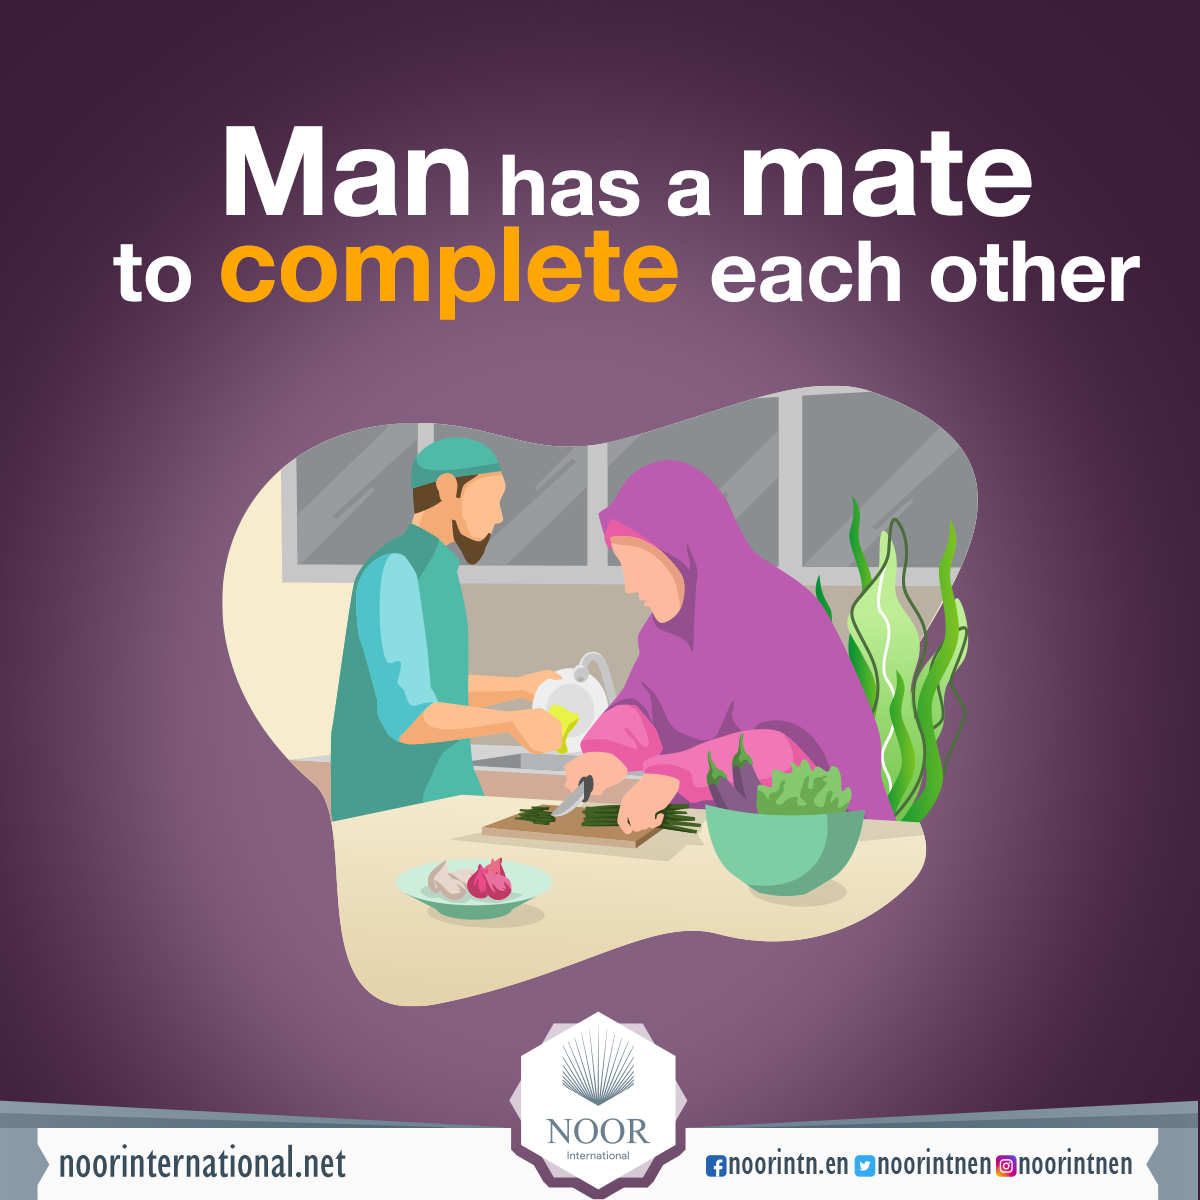 Man has a mate to complete each other